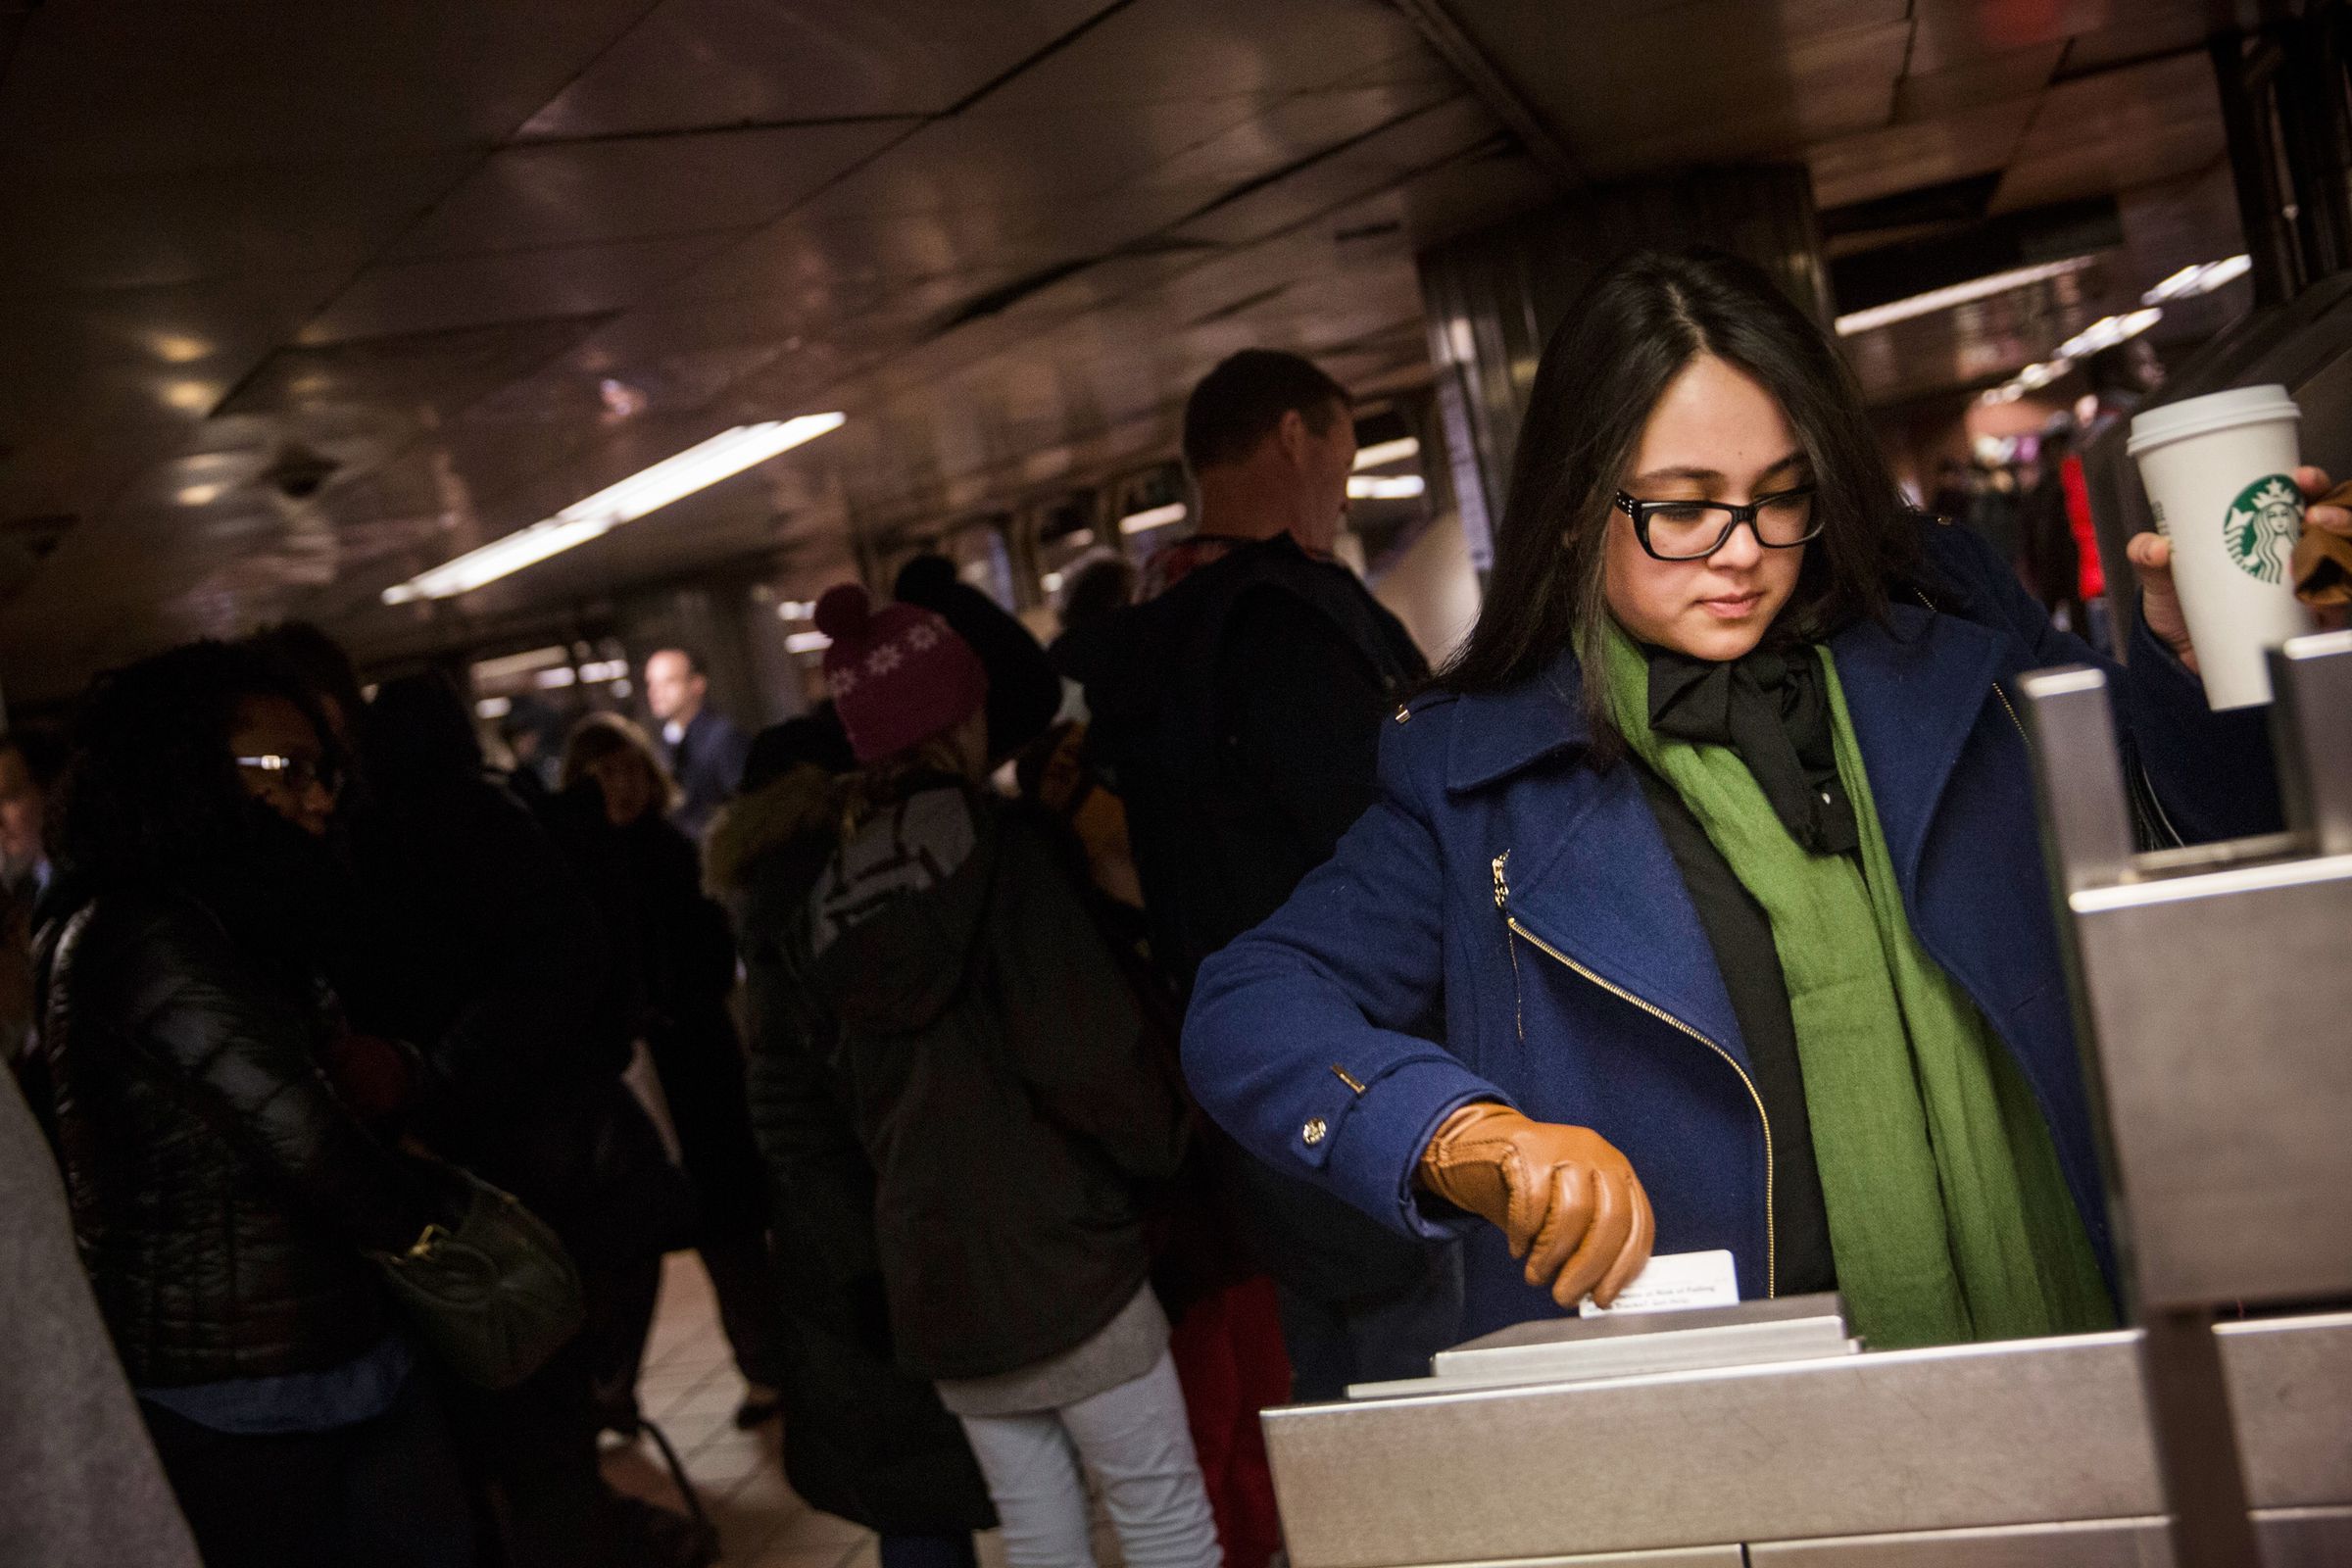 New York City's Subway Fare Increases, Amid Rider Dissatisfaction Over Delays And Outages